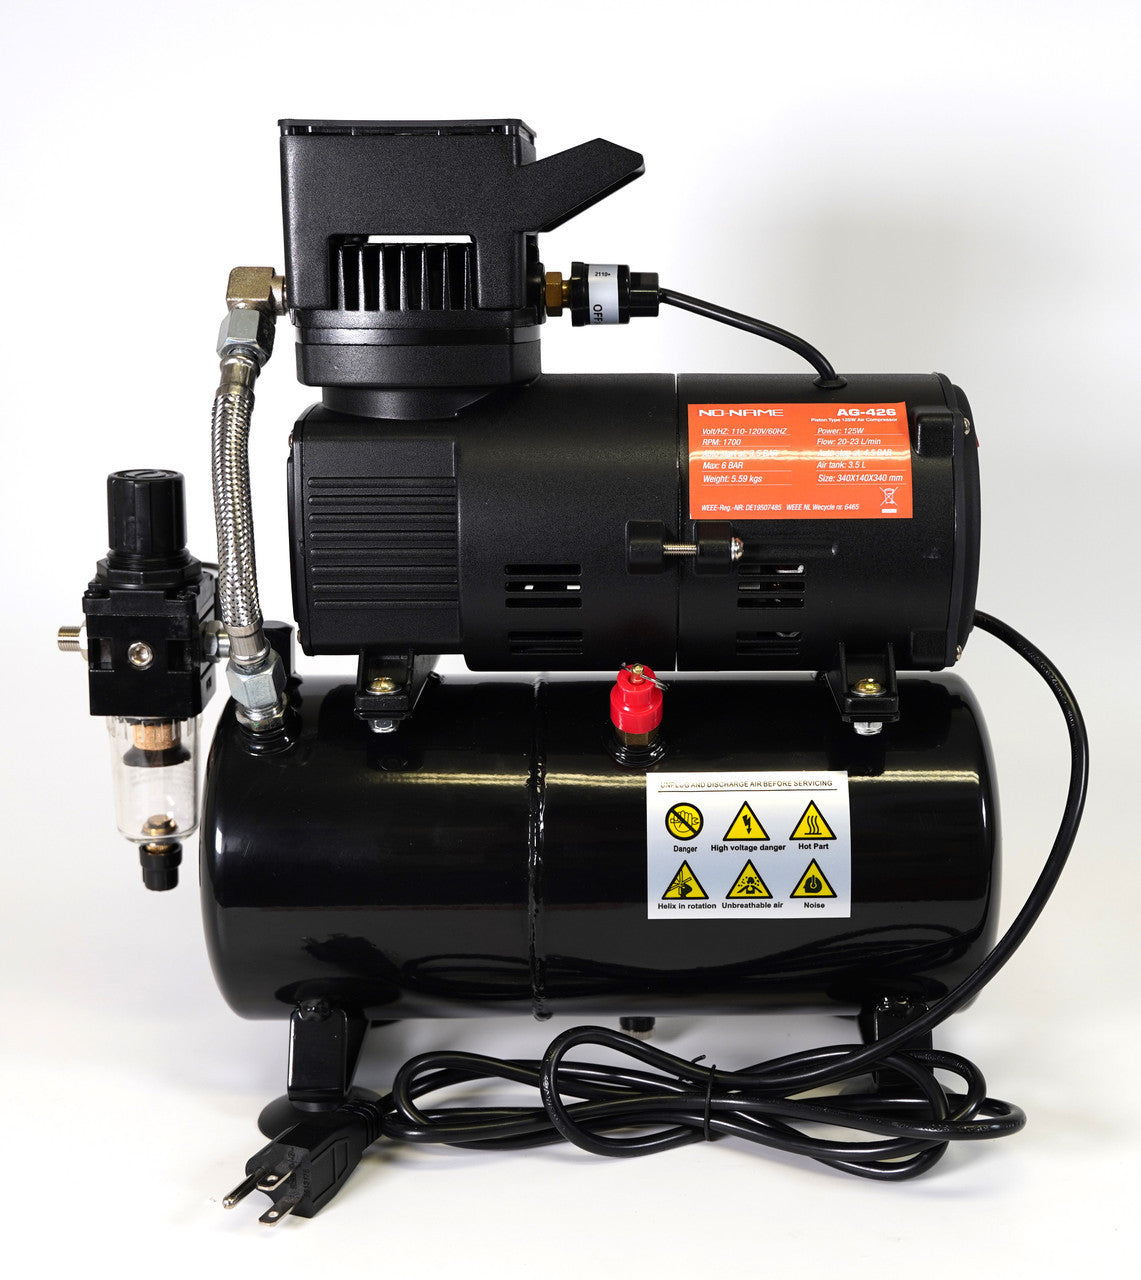 Cool Tooty Airbrush Compressor with 1/4 adapter by NO-NAME Brand NN-AG426adapter NO-NAME brand